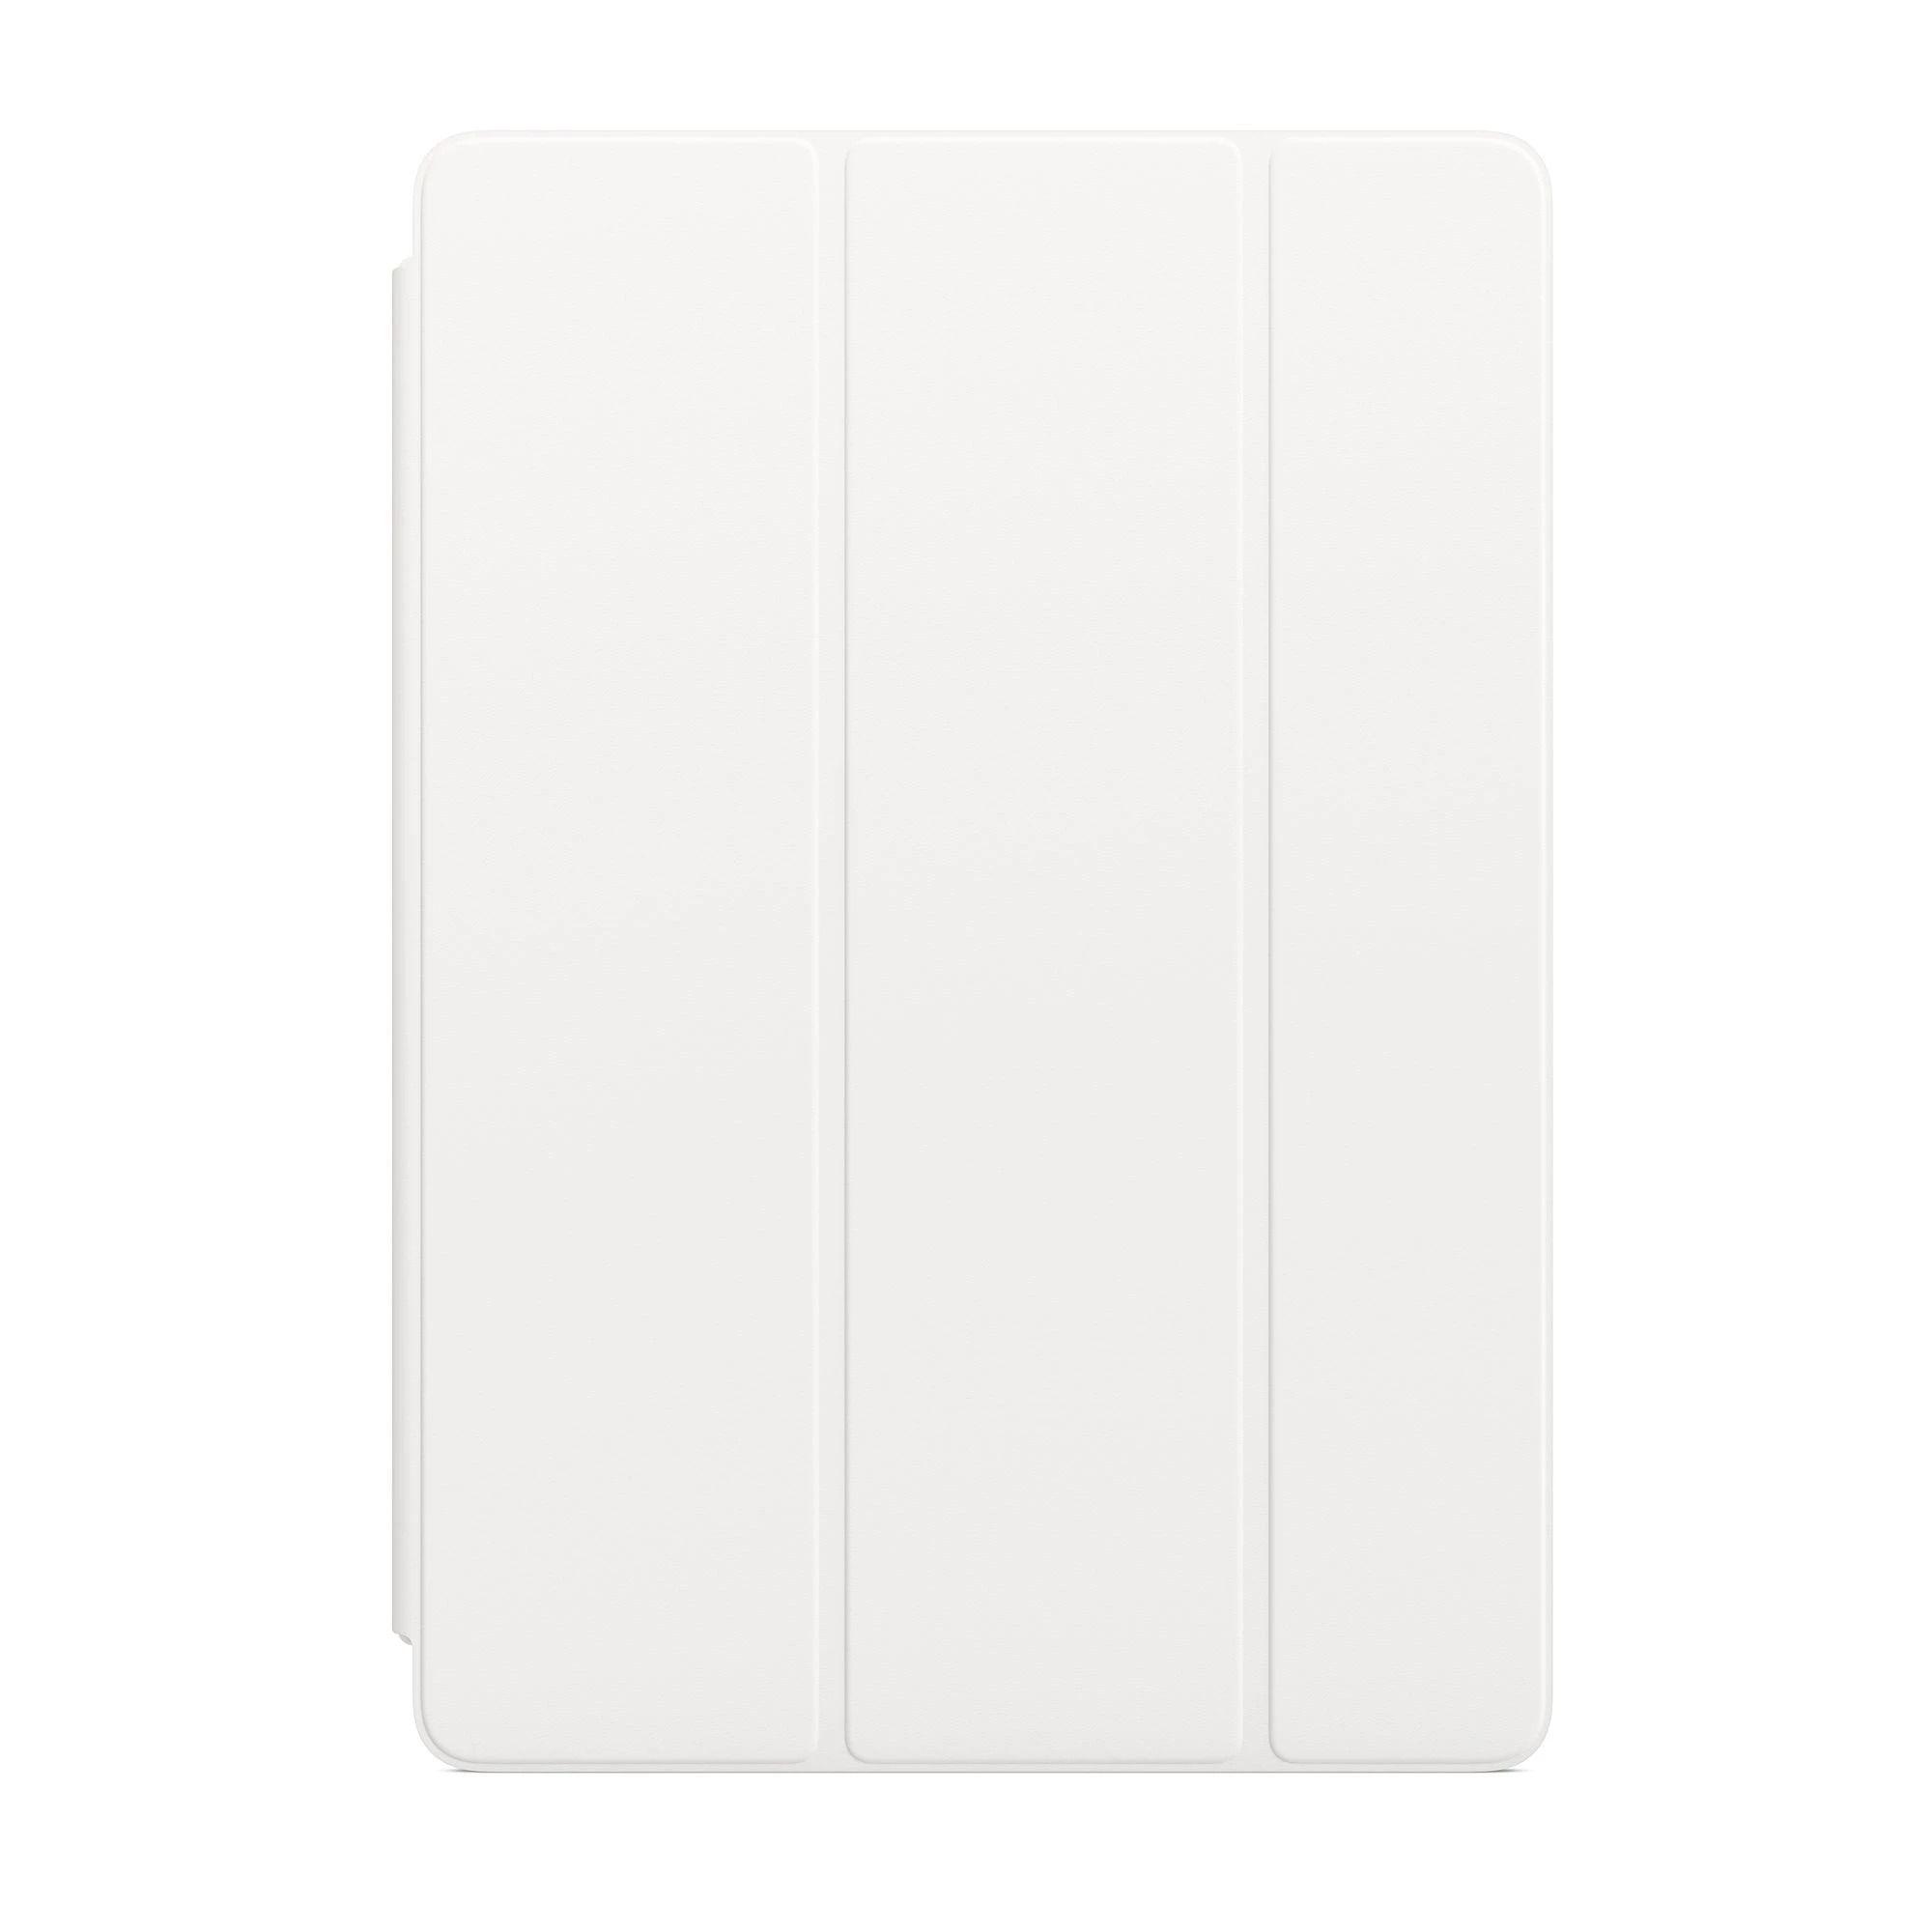 Apple Smart Cover for iPad 10.2" / Air 3 / Pro 10.5" - White (MVQ32)